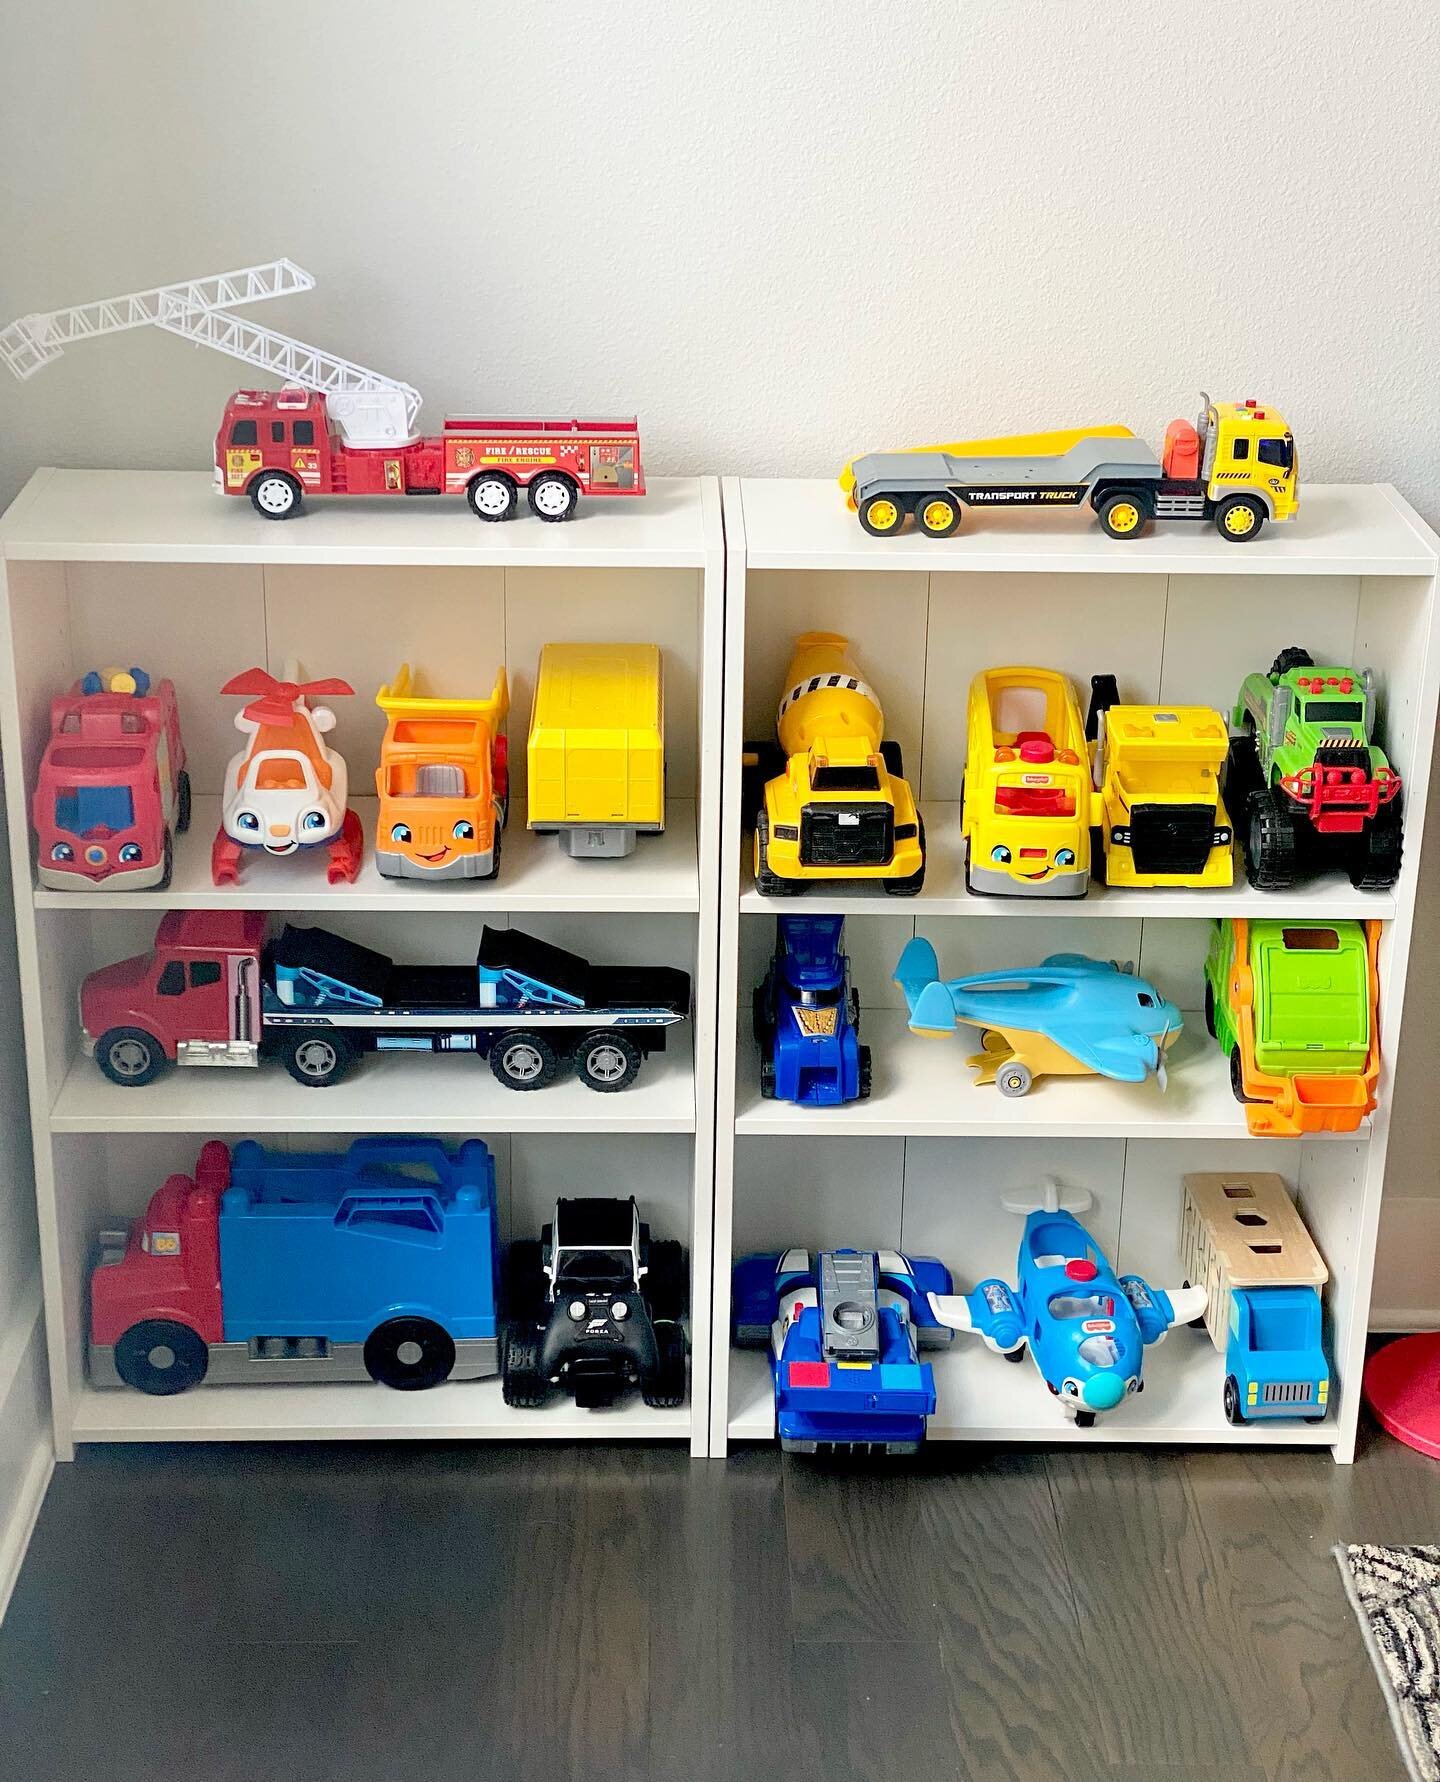 Check out this &ldquo;Transportation Station&rdquo; 🚒 ✈️ 🚌 🚛

The struggle is real when it comes to storing large vehicles! They&rsquo;re awkward in cubbies and too bulky for baskets, but just right on bookshelves. 

Tag a boy mom who needs to see